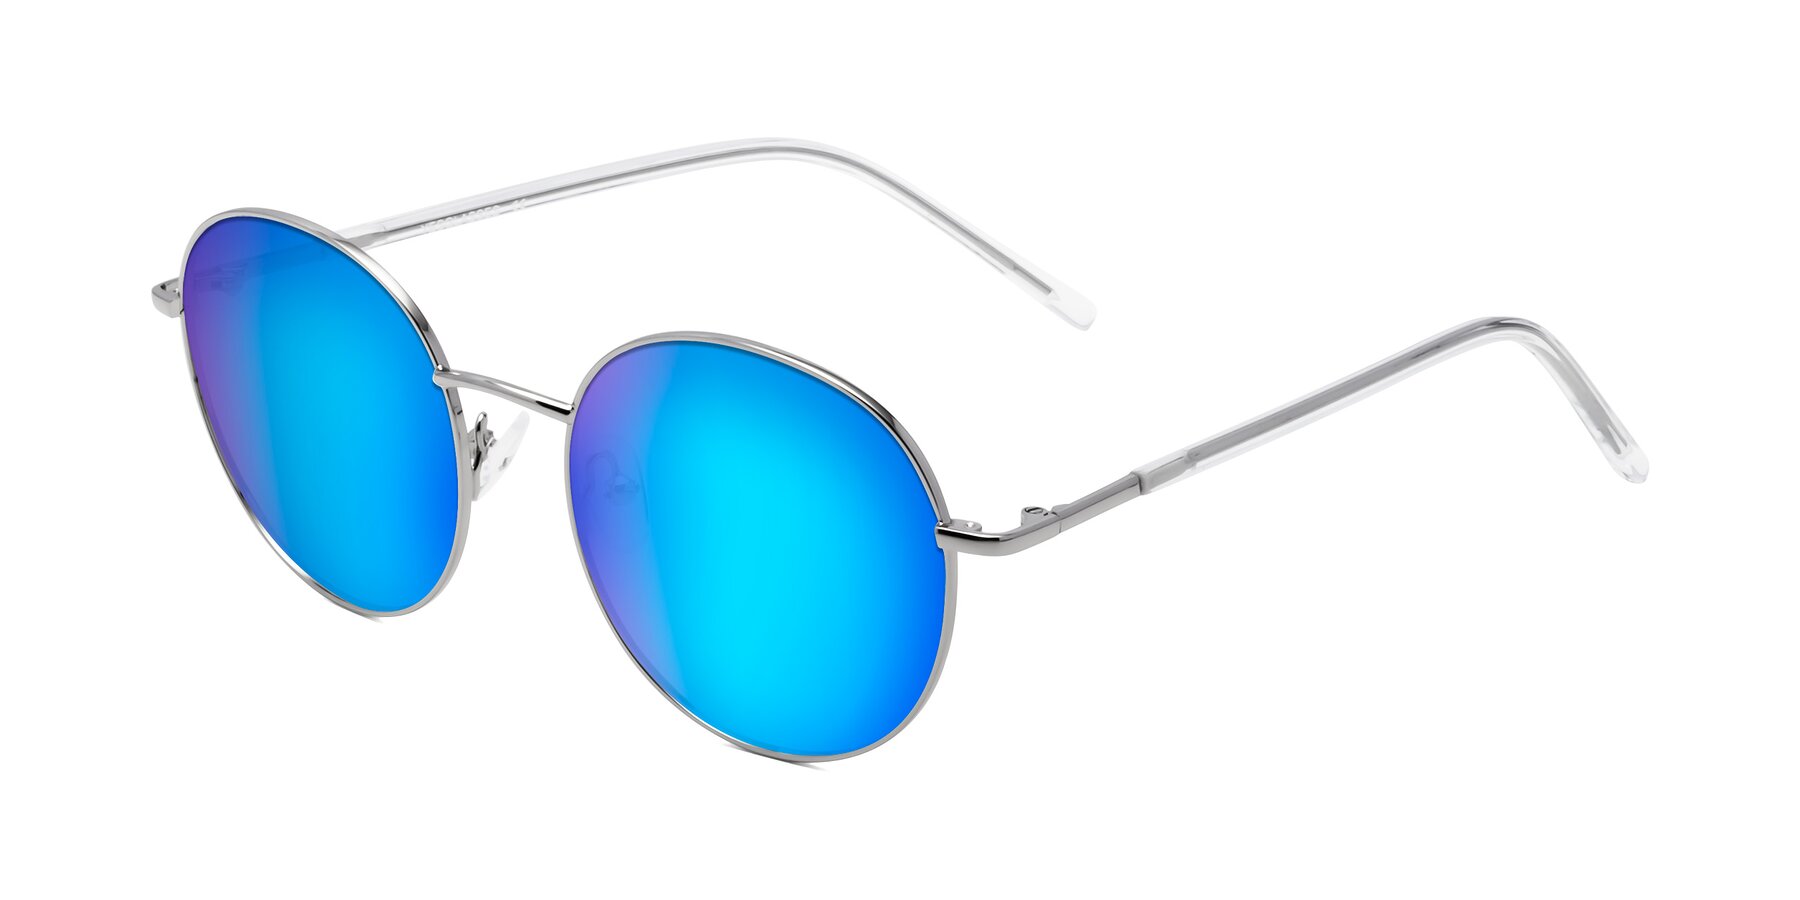 Silver Oversized Metal Round Mirrored Sunglasses with Blue Sunwear Lenses -  Cosmos